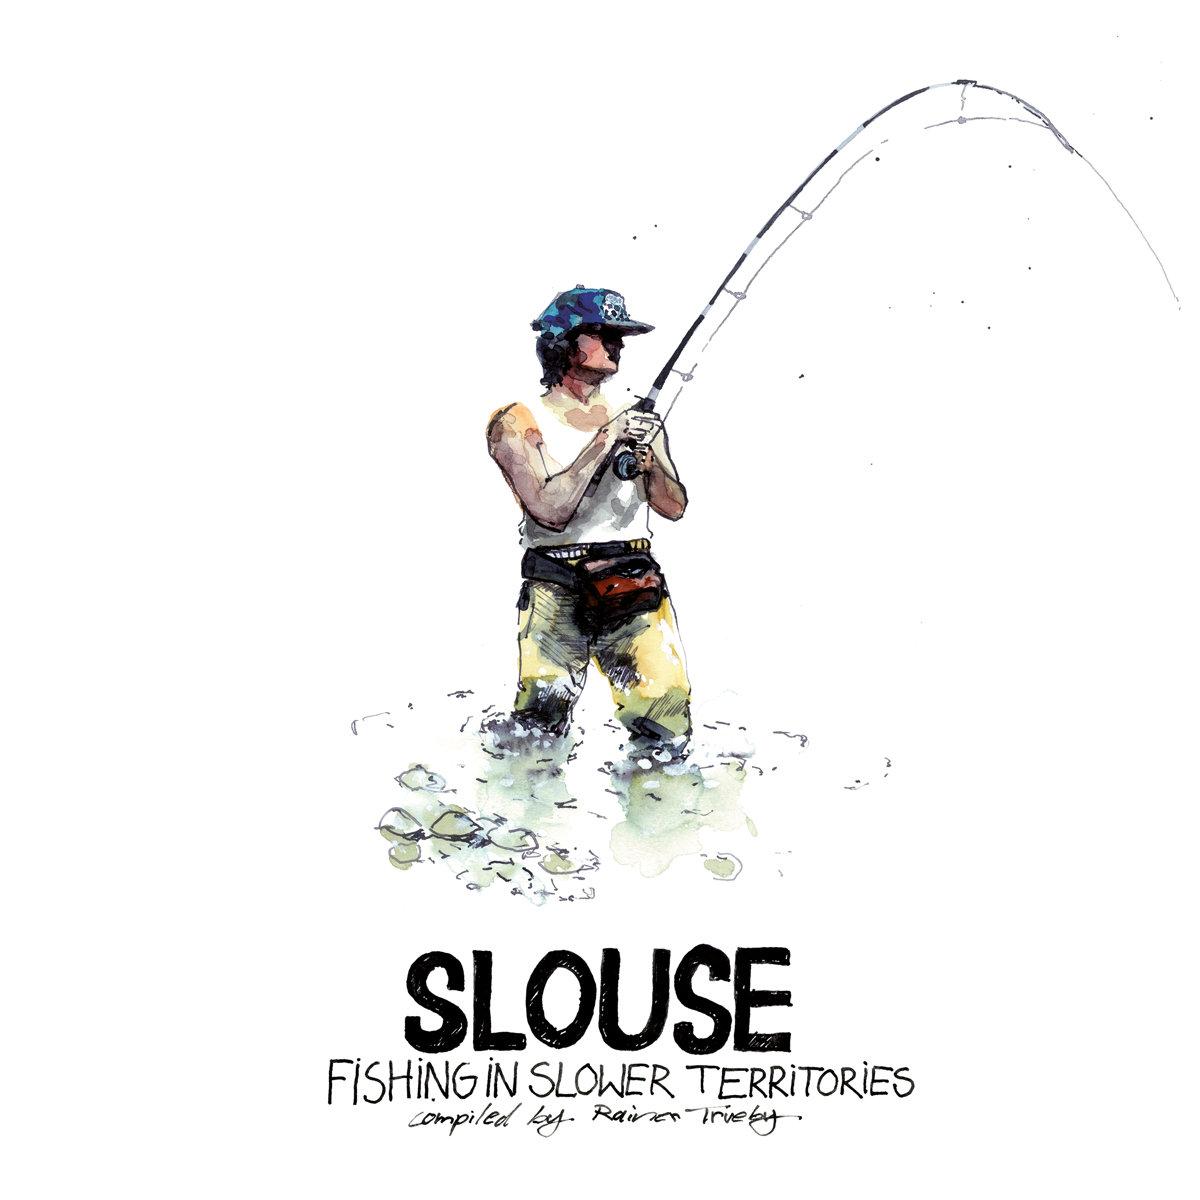 VARIOUS ARTISTS - Slouse - Fishing In Slower Territories